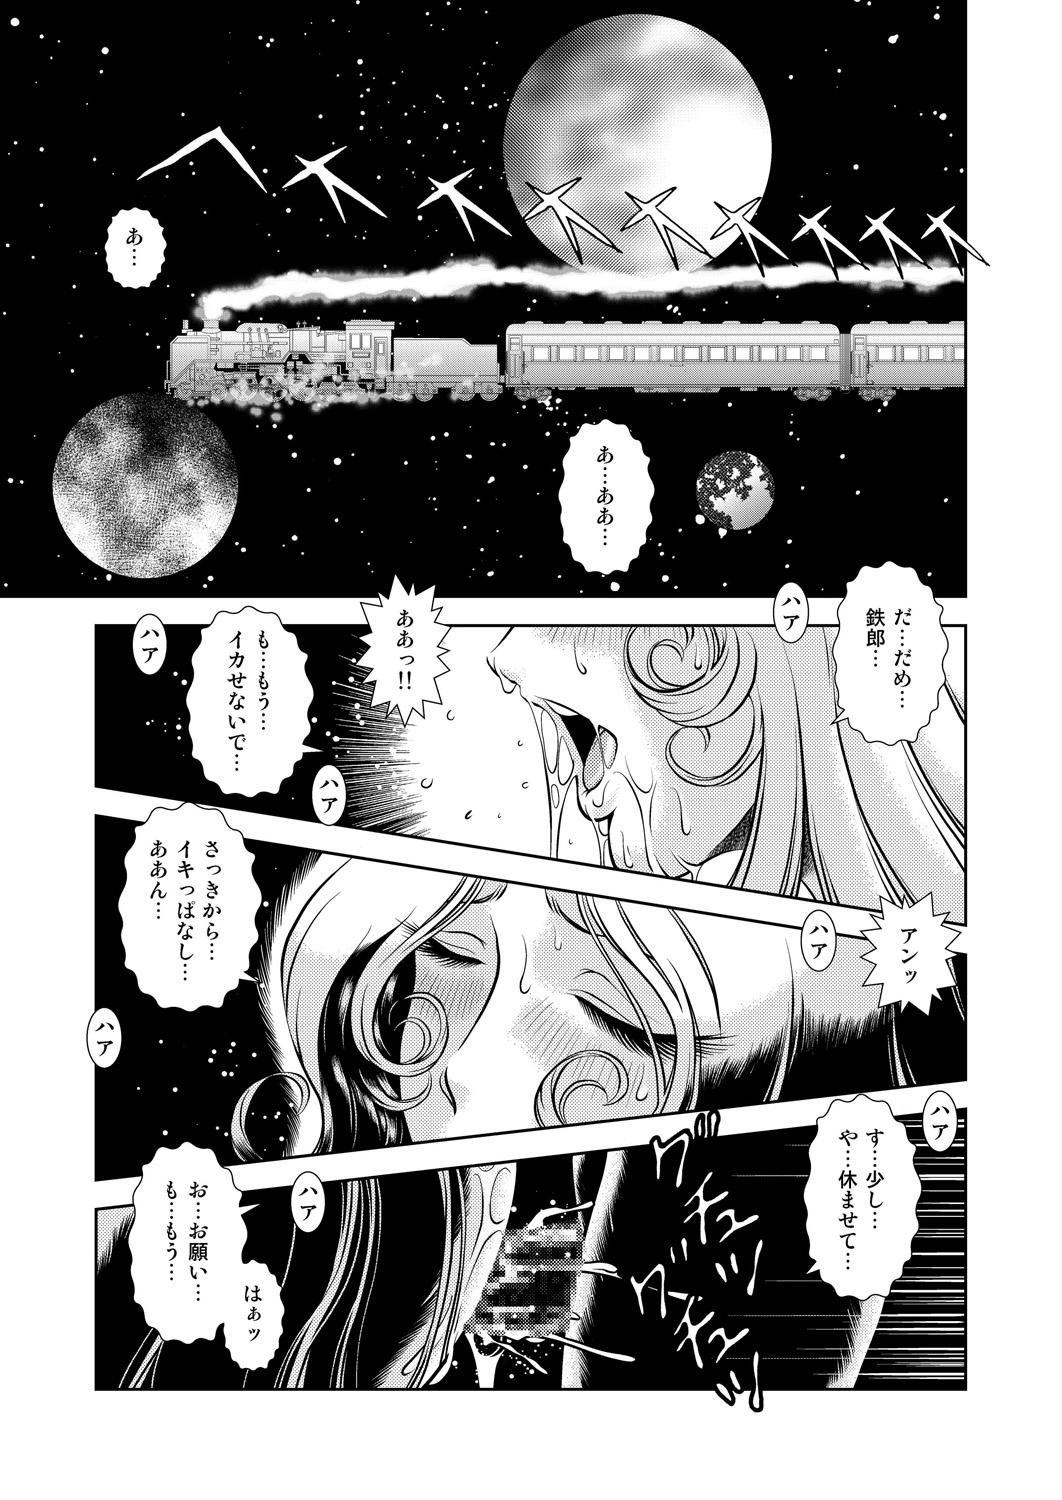 The Maetel Story 9 - Galaxy express 999 Negao - Page 3